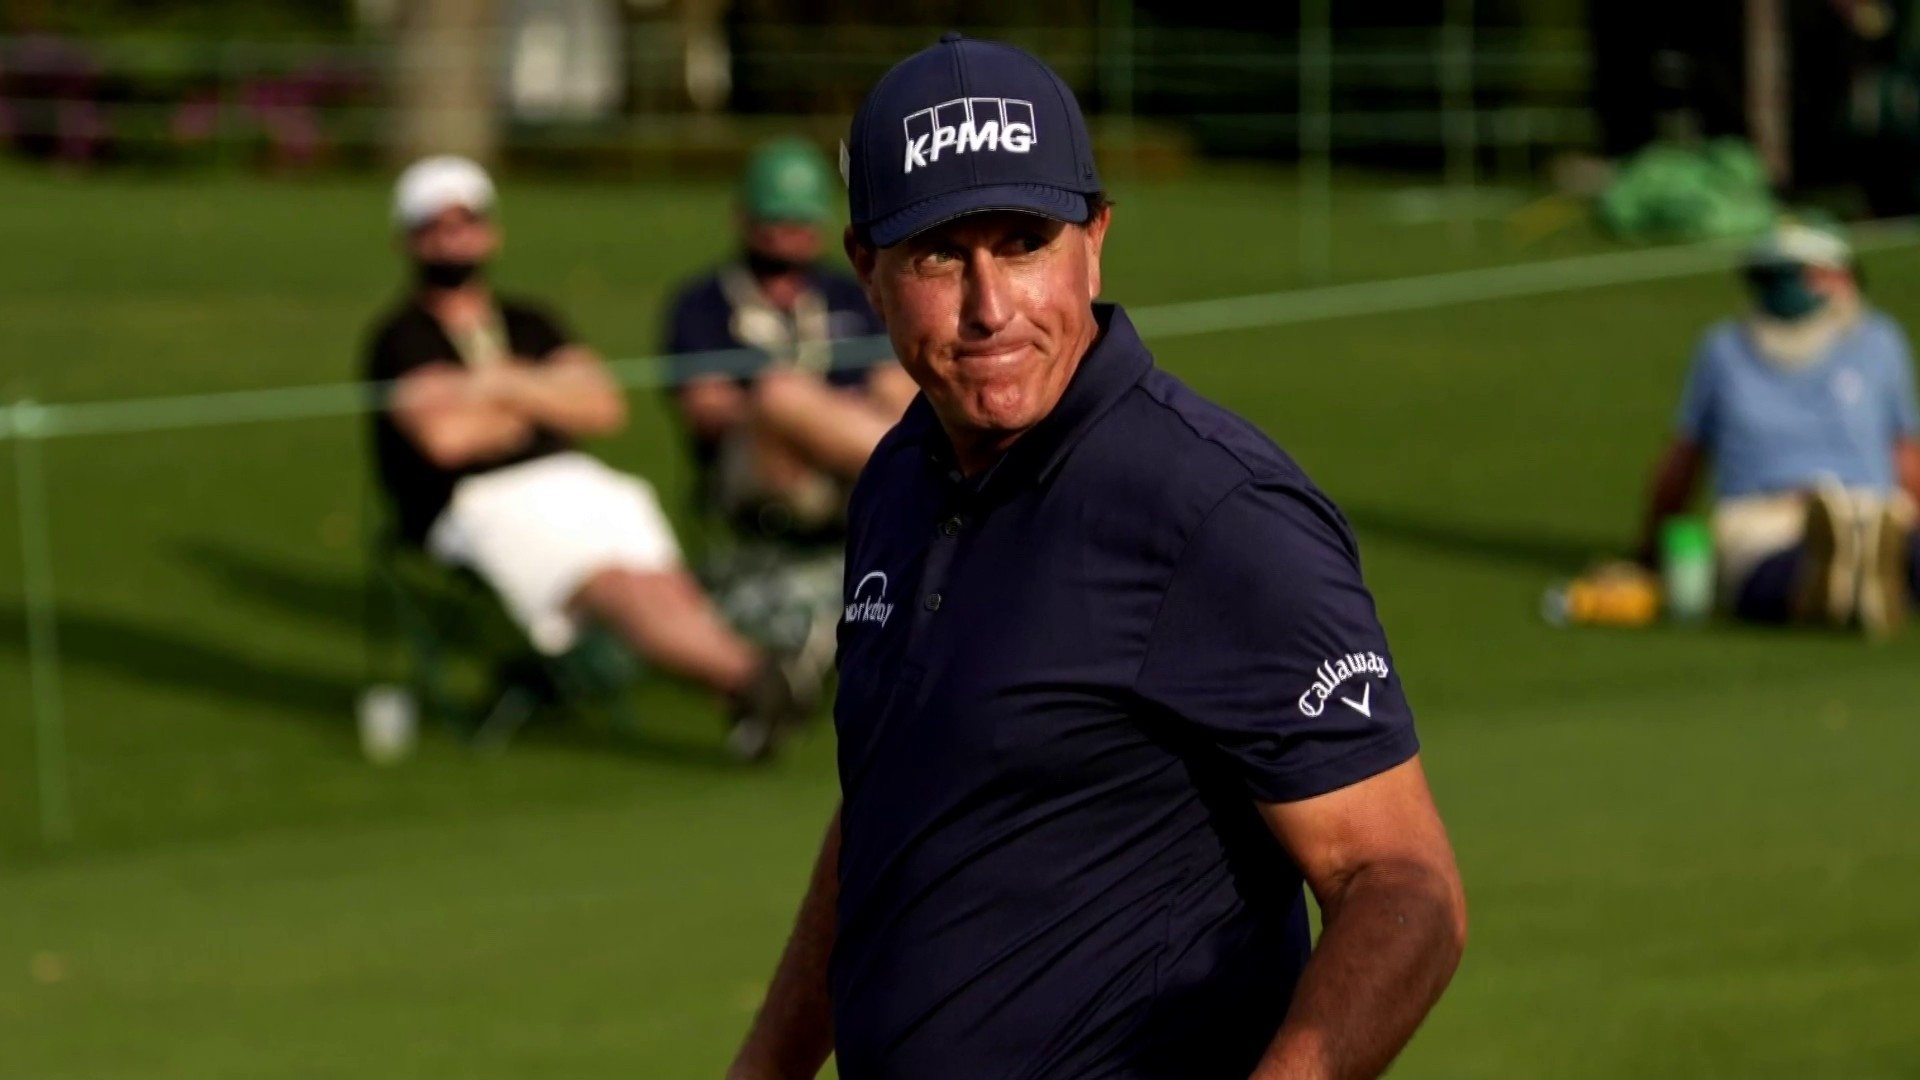 Phil Mickelson decides not to play in Masters tournament